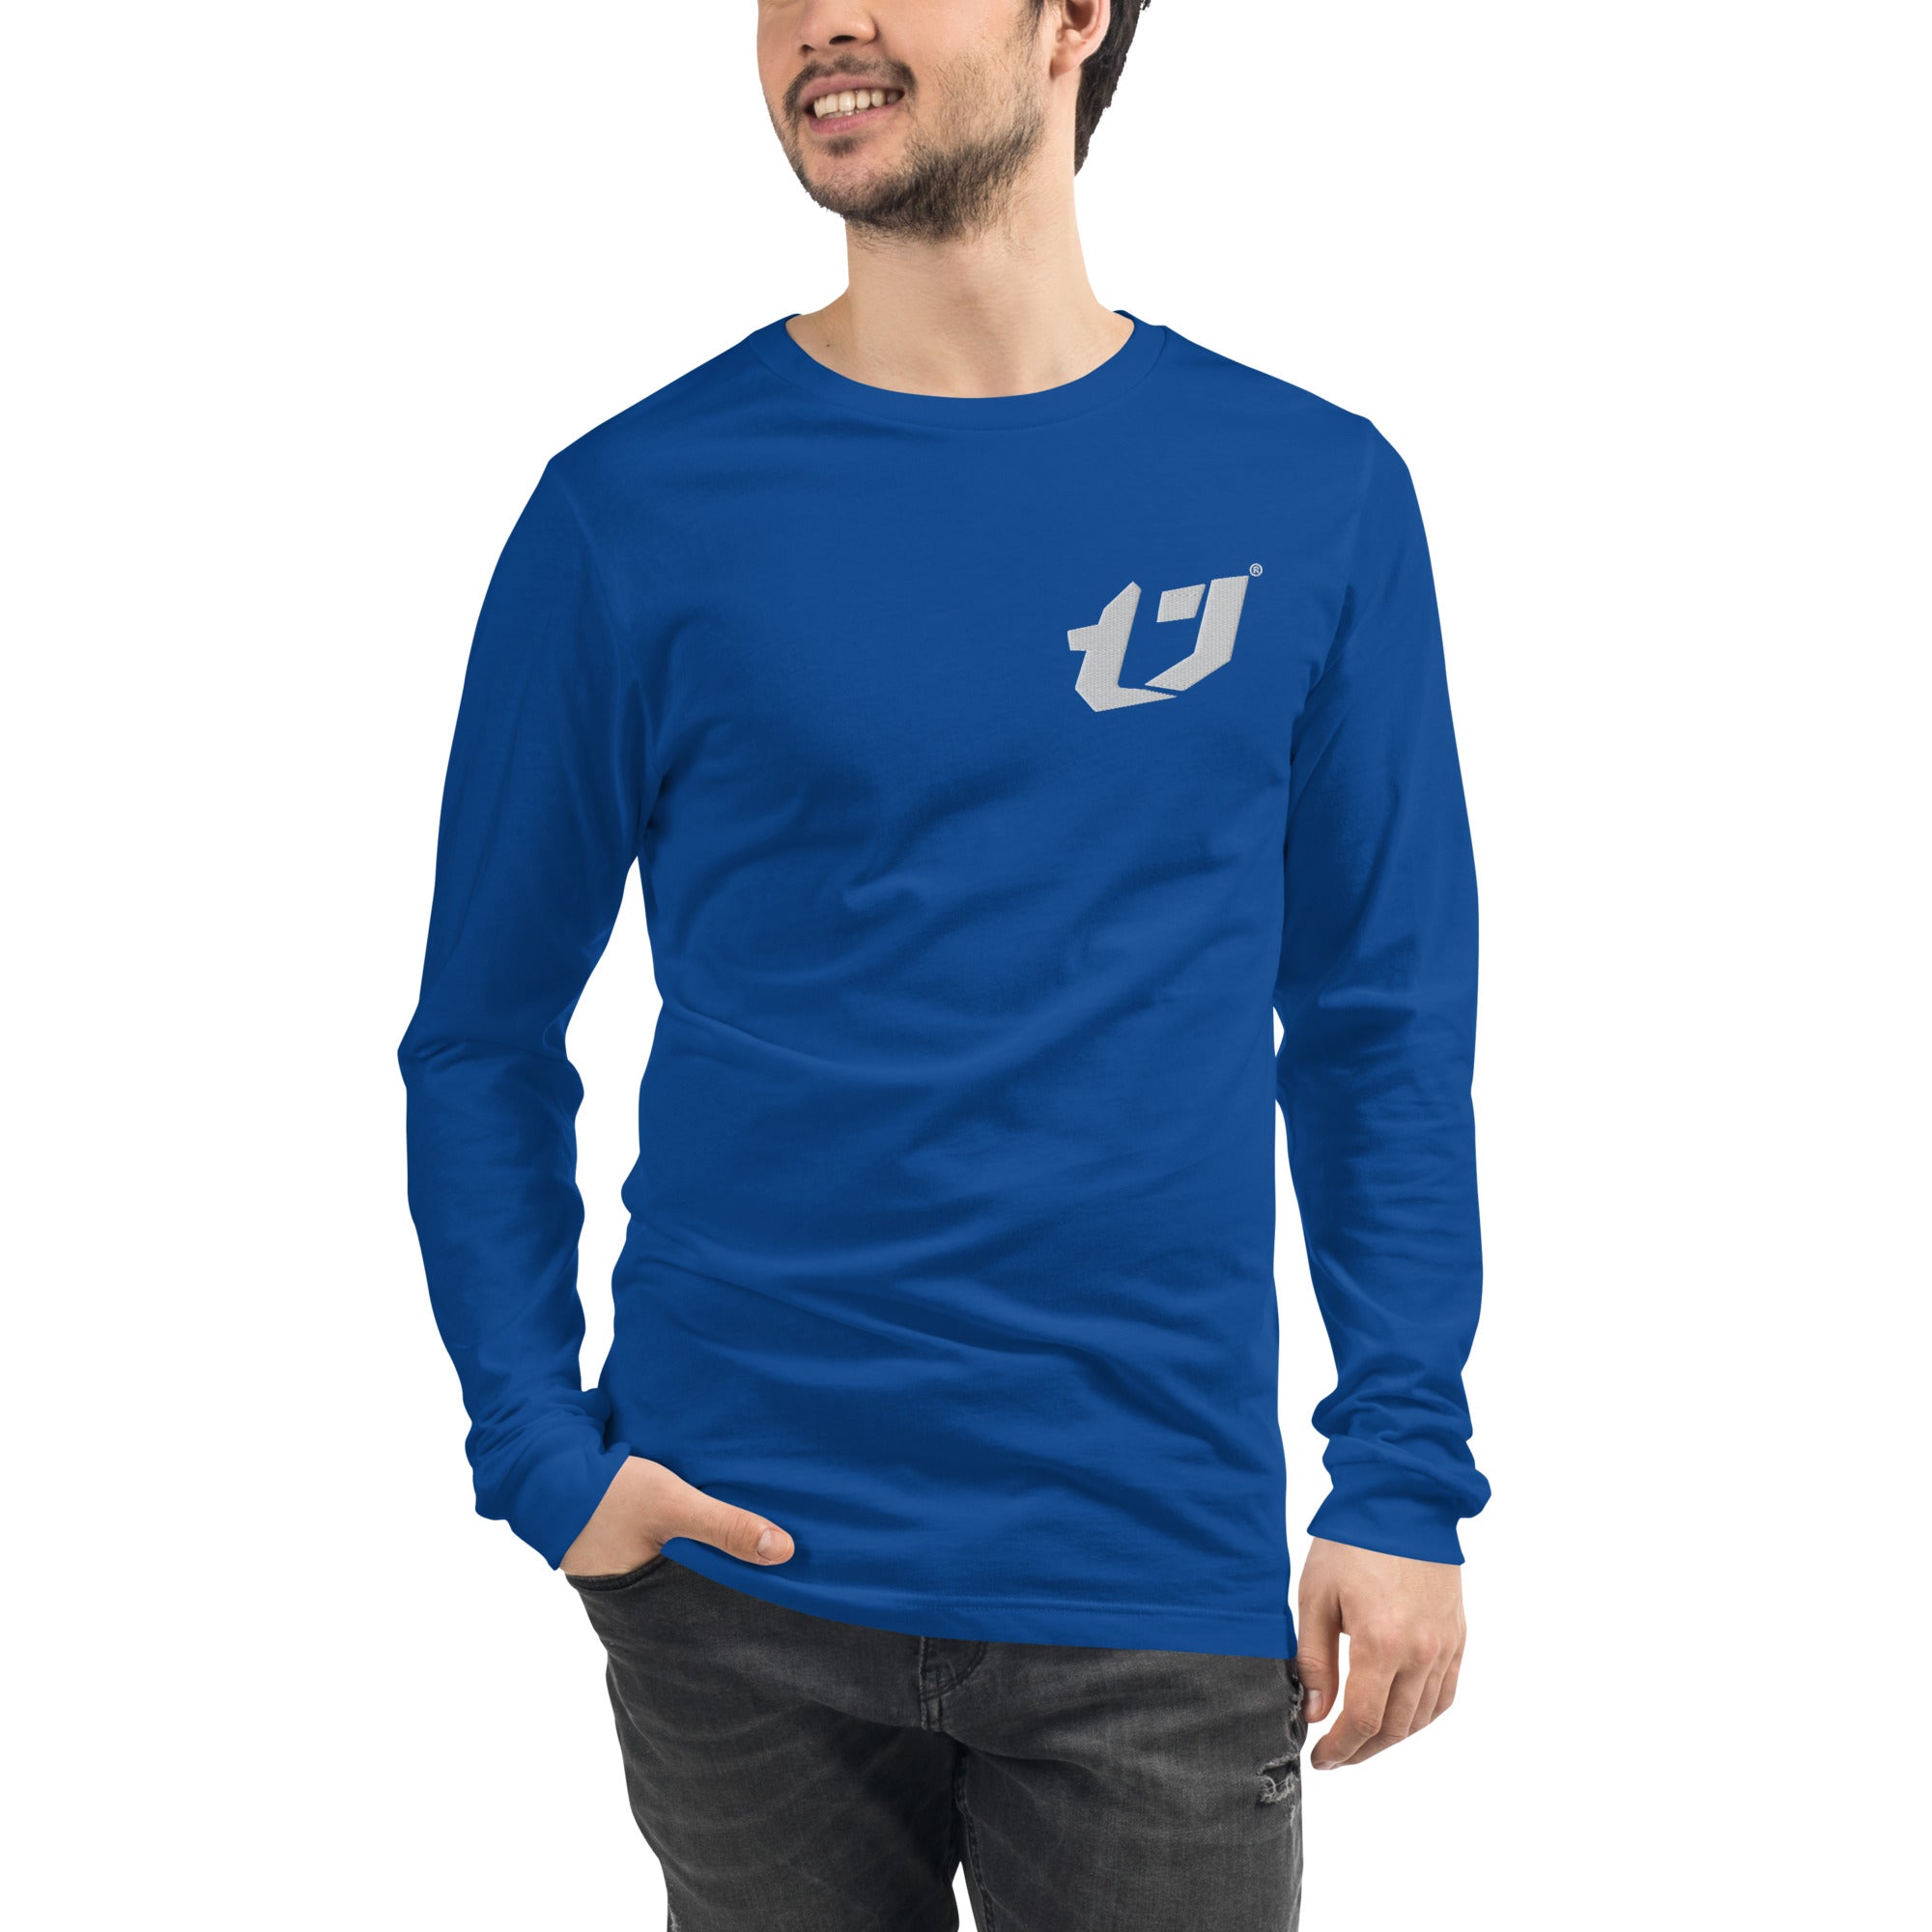 N'Trench Men/Guys Embroidery right centered logo Long Sleeve Tee